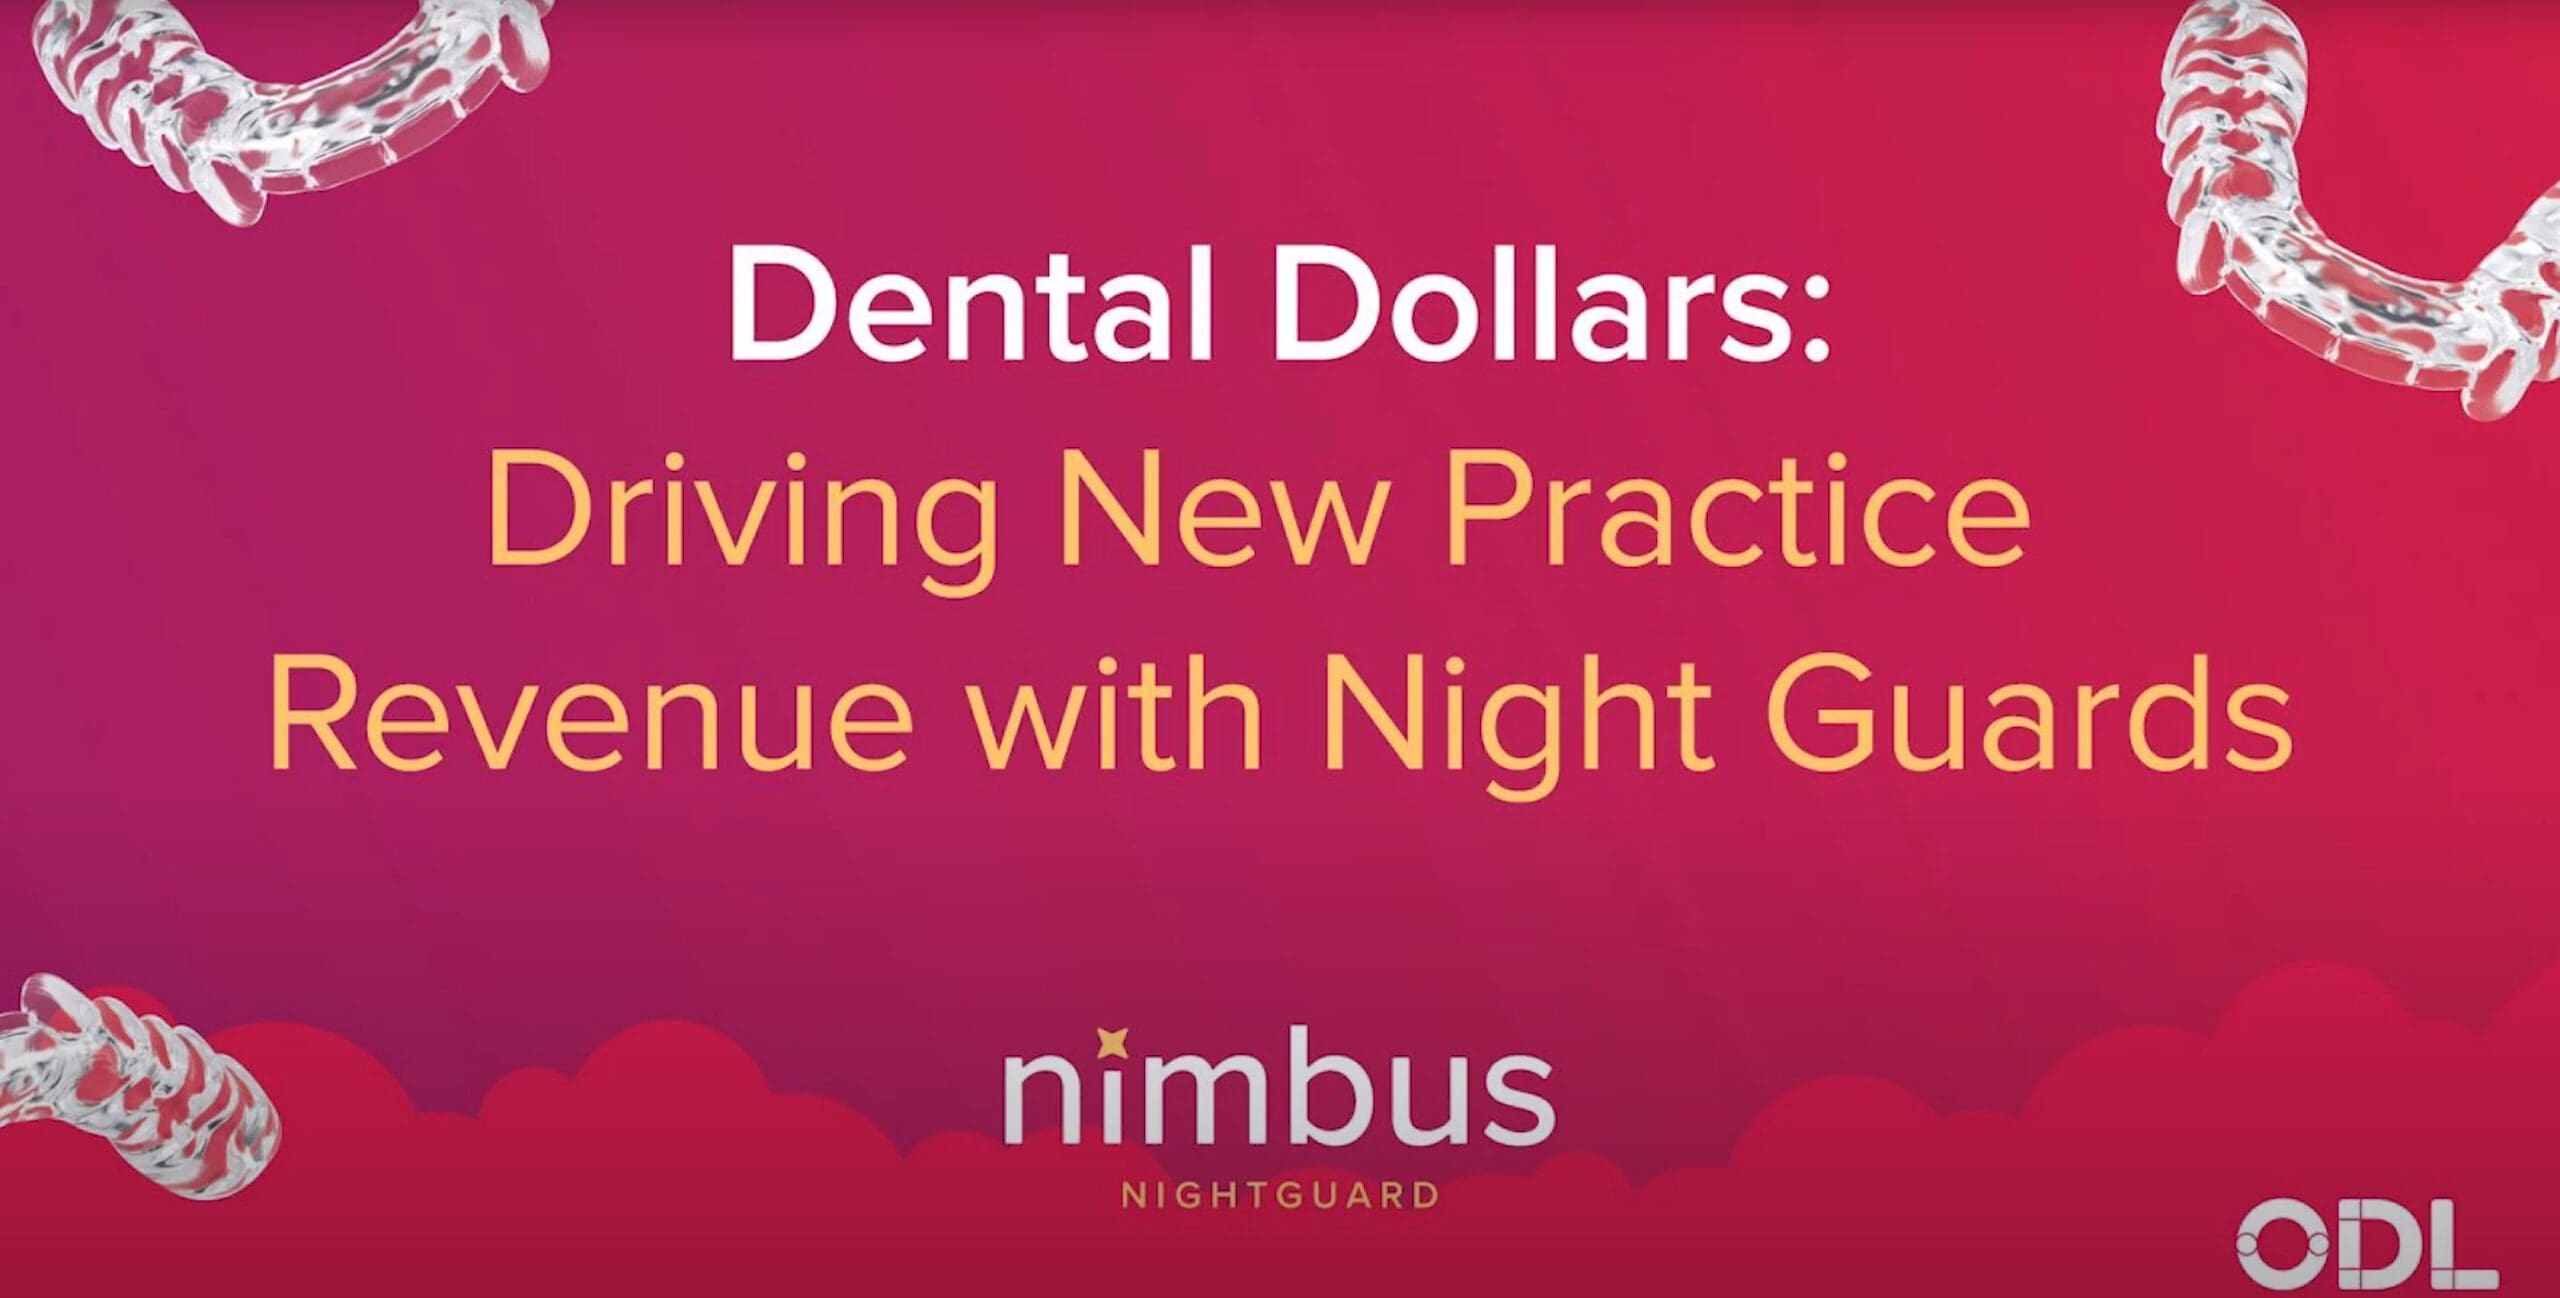 Dental Dollars: Driving New Practice Revenue with Night Guards